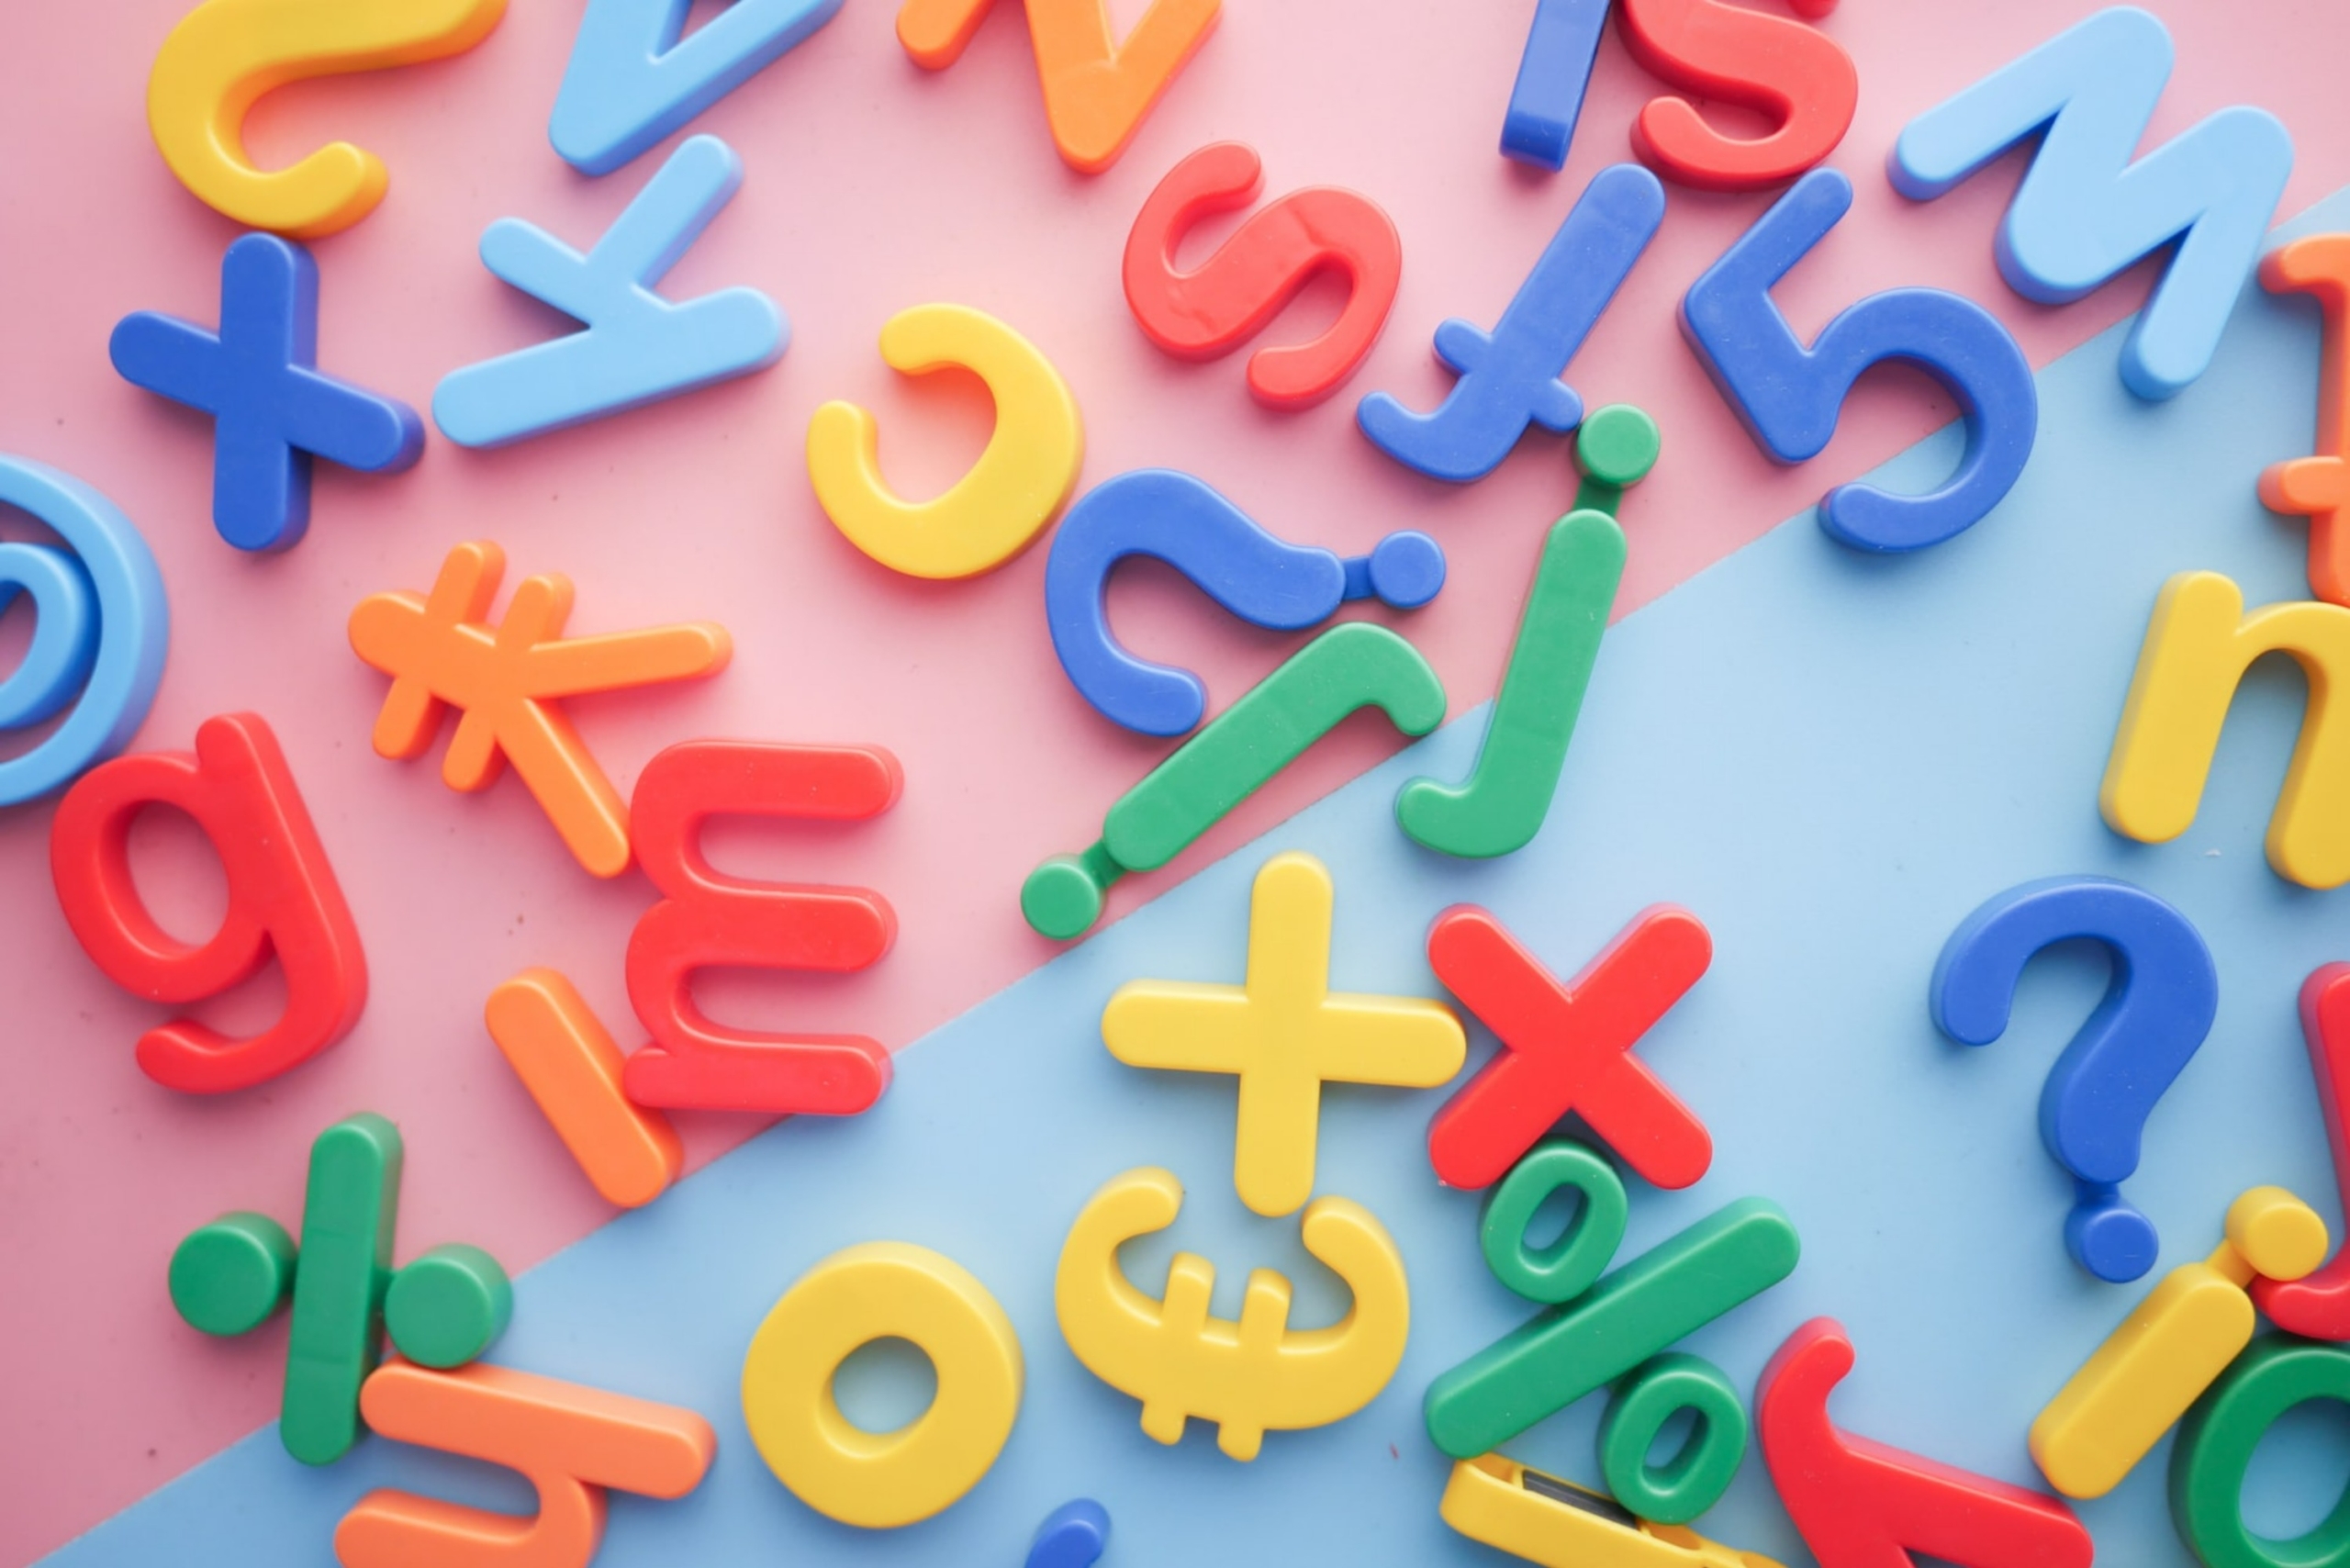 Colorful magnetic letters scattered